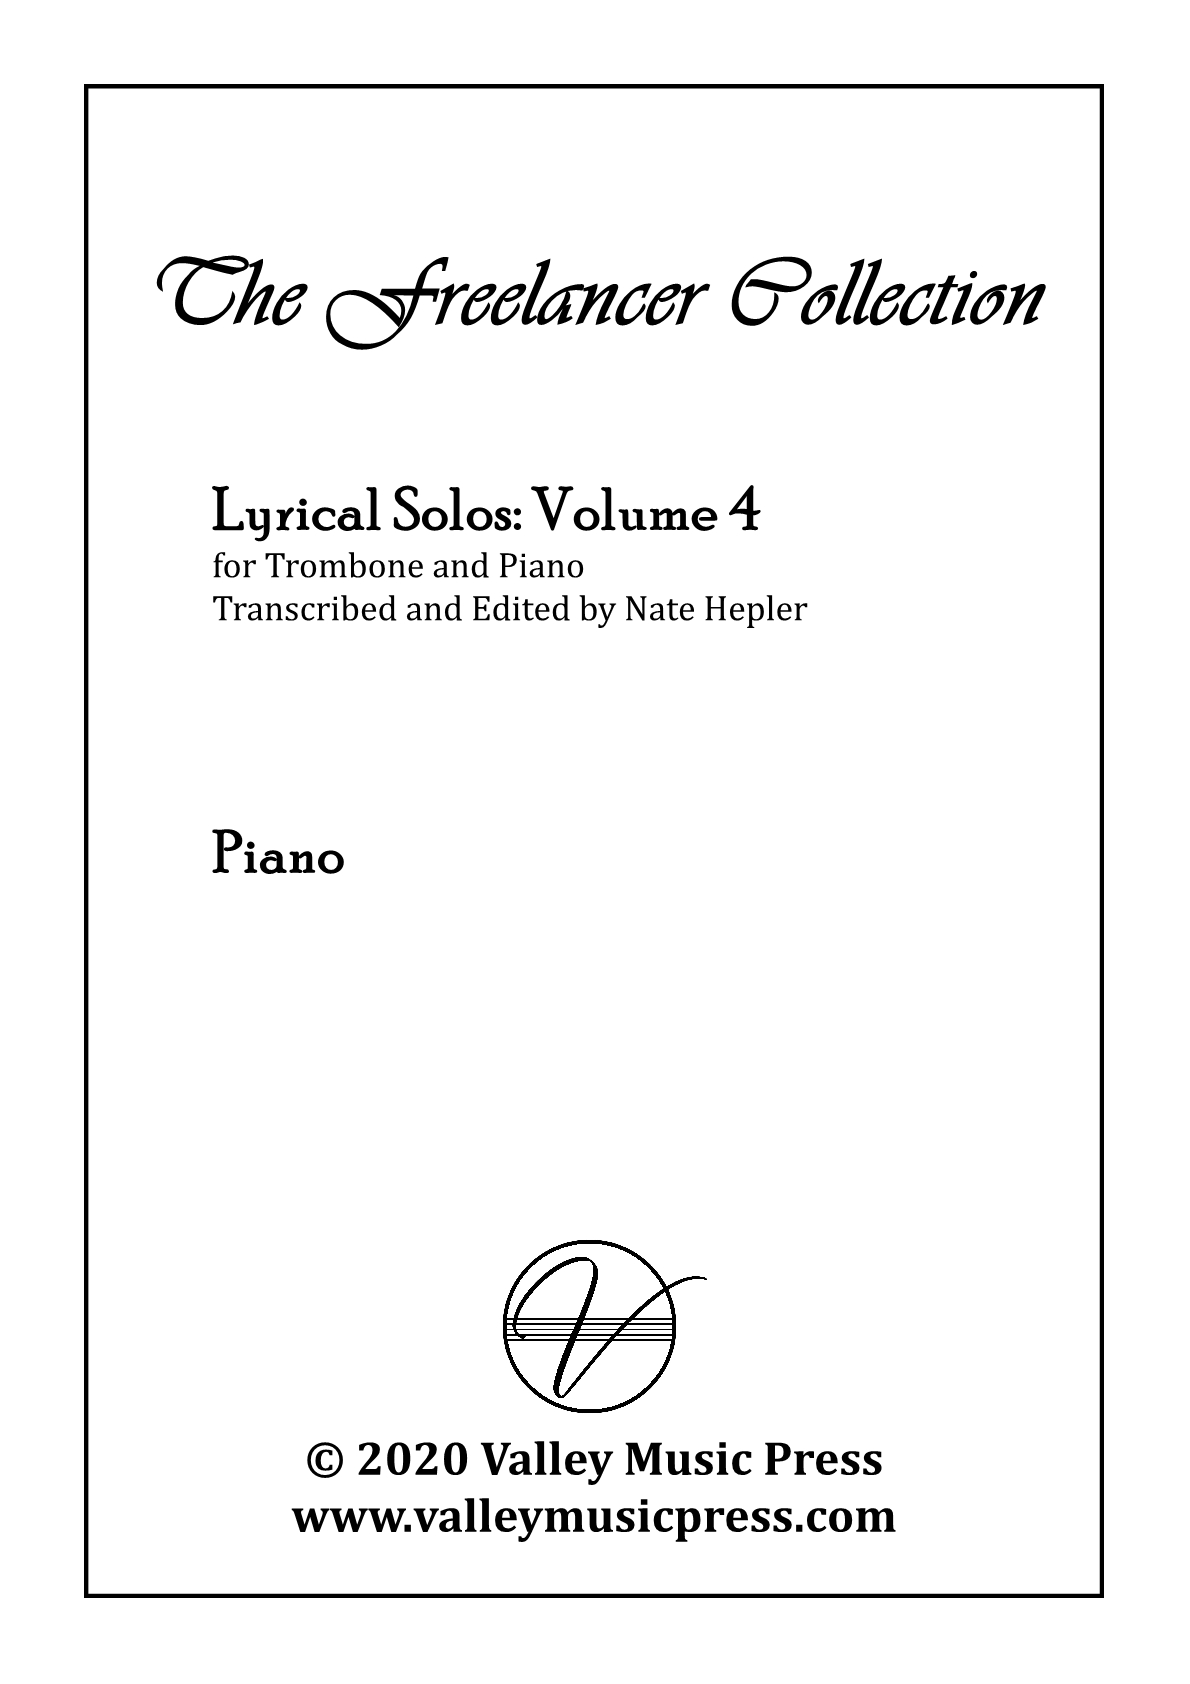 Hepler - Freelancer Collection Lyrical Solos Vol 4 (Trb & Piano) - Click Image to Close